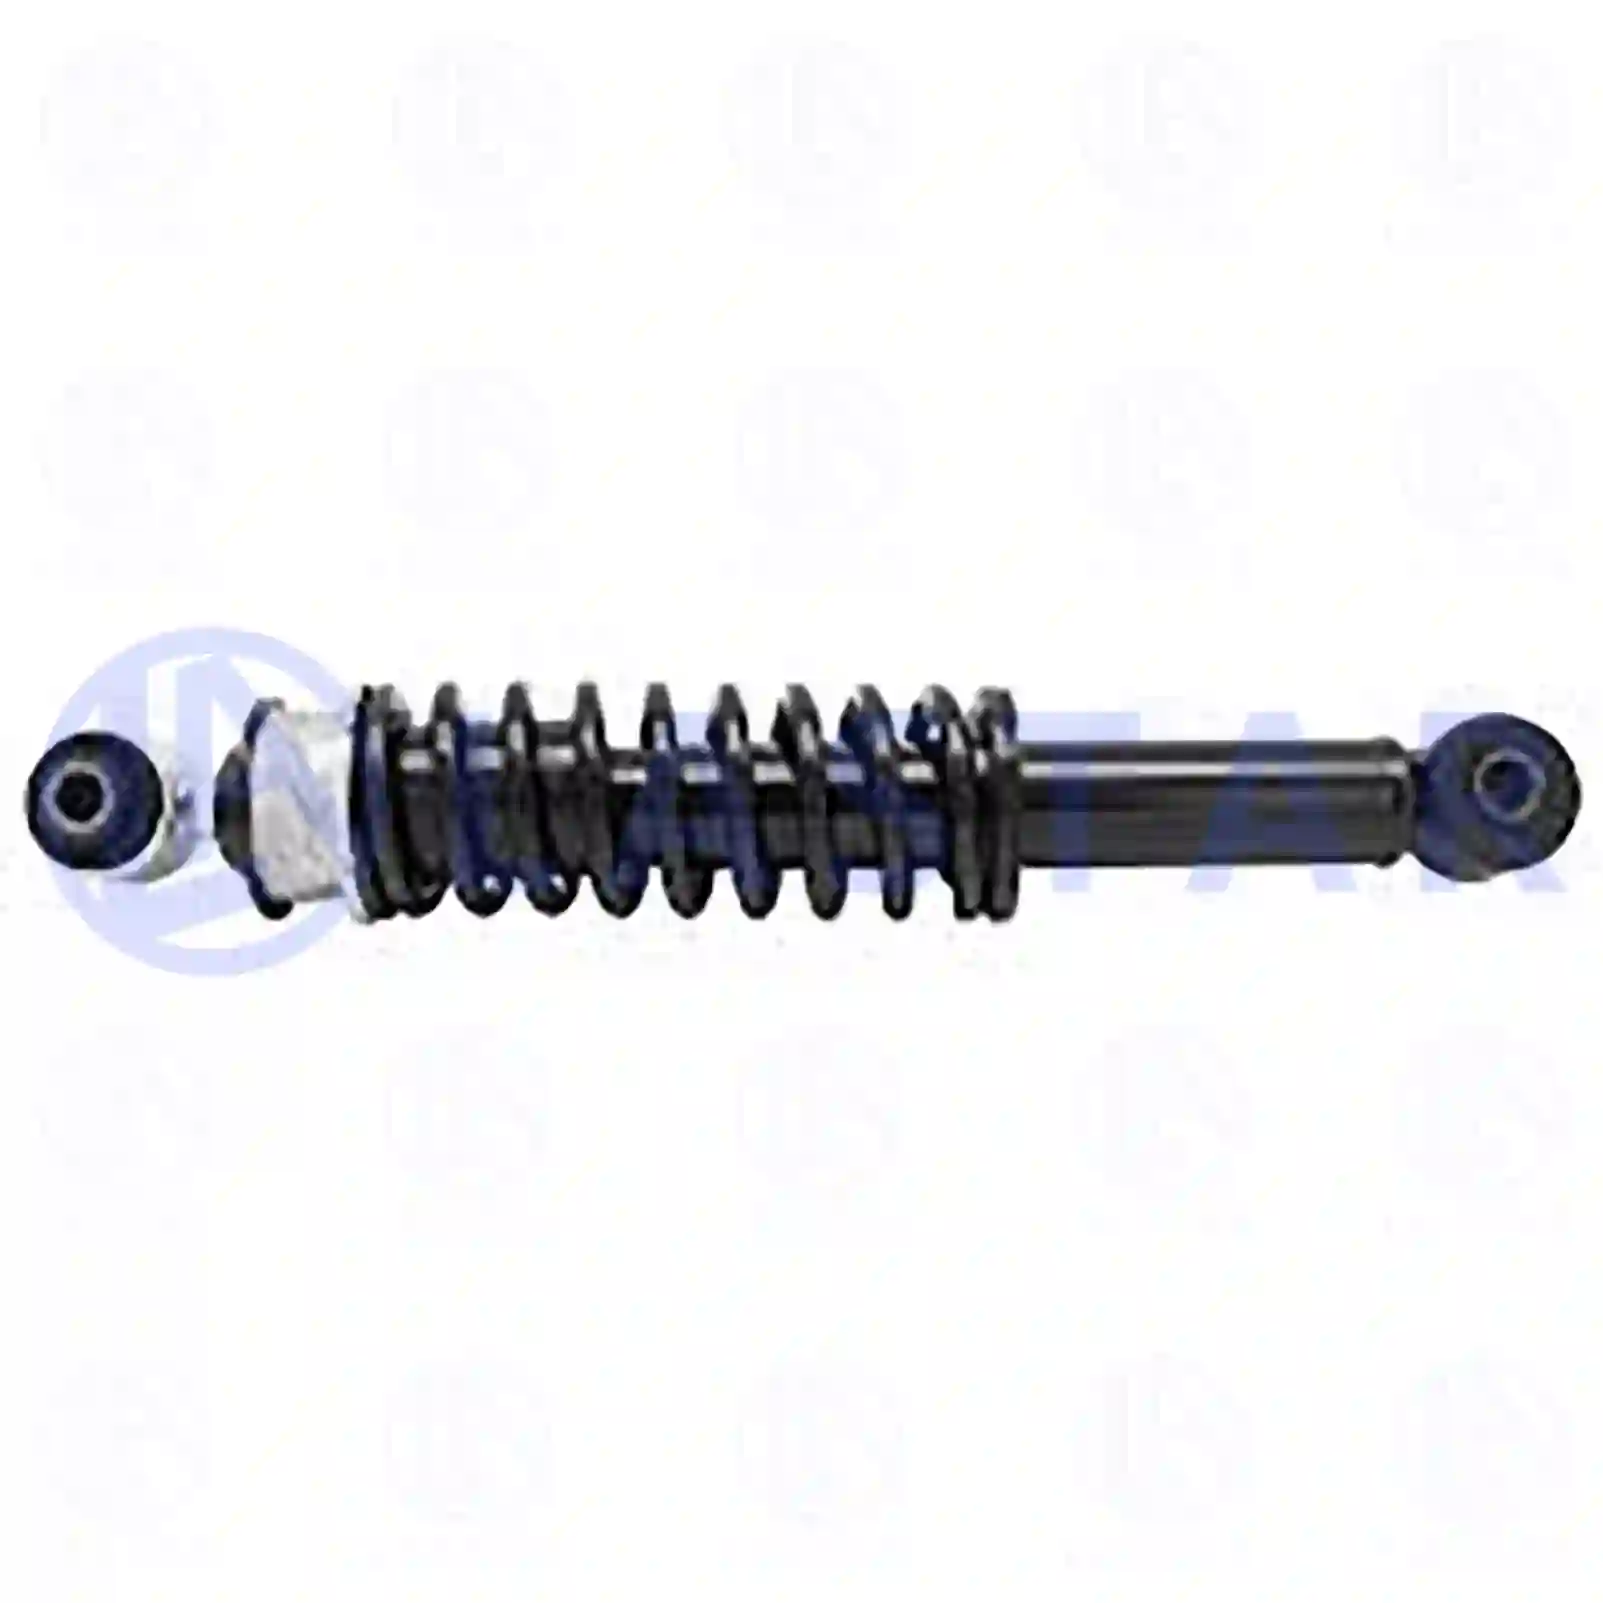 Cabin shock absorber, 77735615, 504084380, , , ||  77735615 Lastar Spare Part | Truck Spare Parts, Auotomotive Spare Parts Cabin shock absorber, 77735615, 504084380, , , ||  77735615 Lastar Spare Part | Truck Spare Parts, Auotomotive Spare Parts